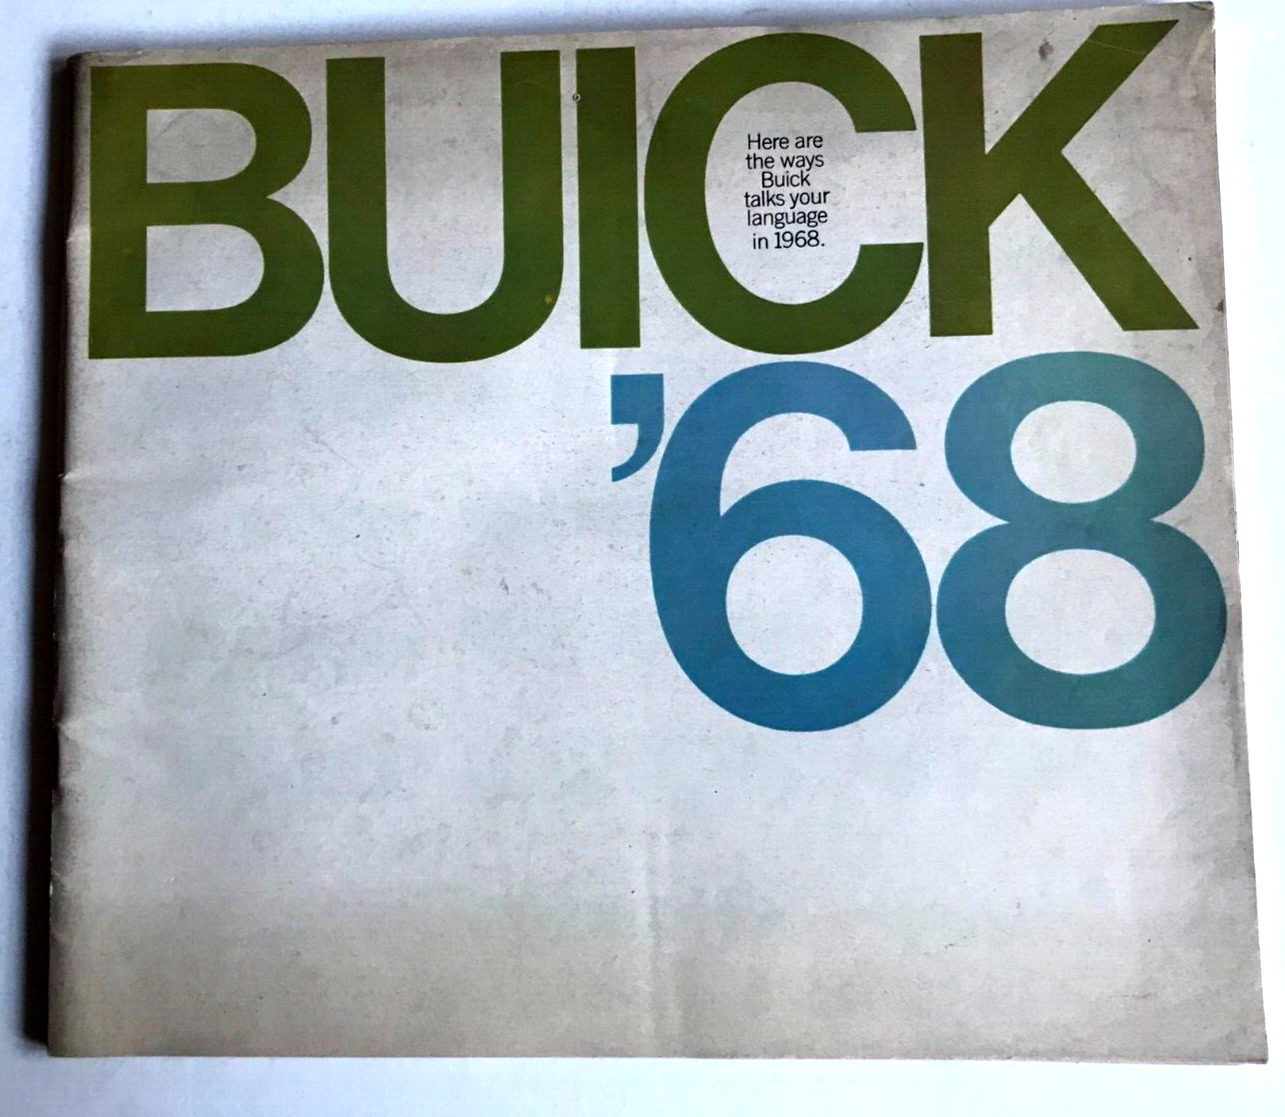 1968  BUICK: BUICK TALKS YOUR LANGUAGE - CAR AUTO SALES BROCHURE  -- 74 PAGES